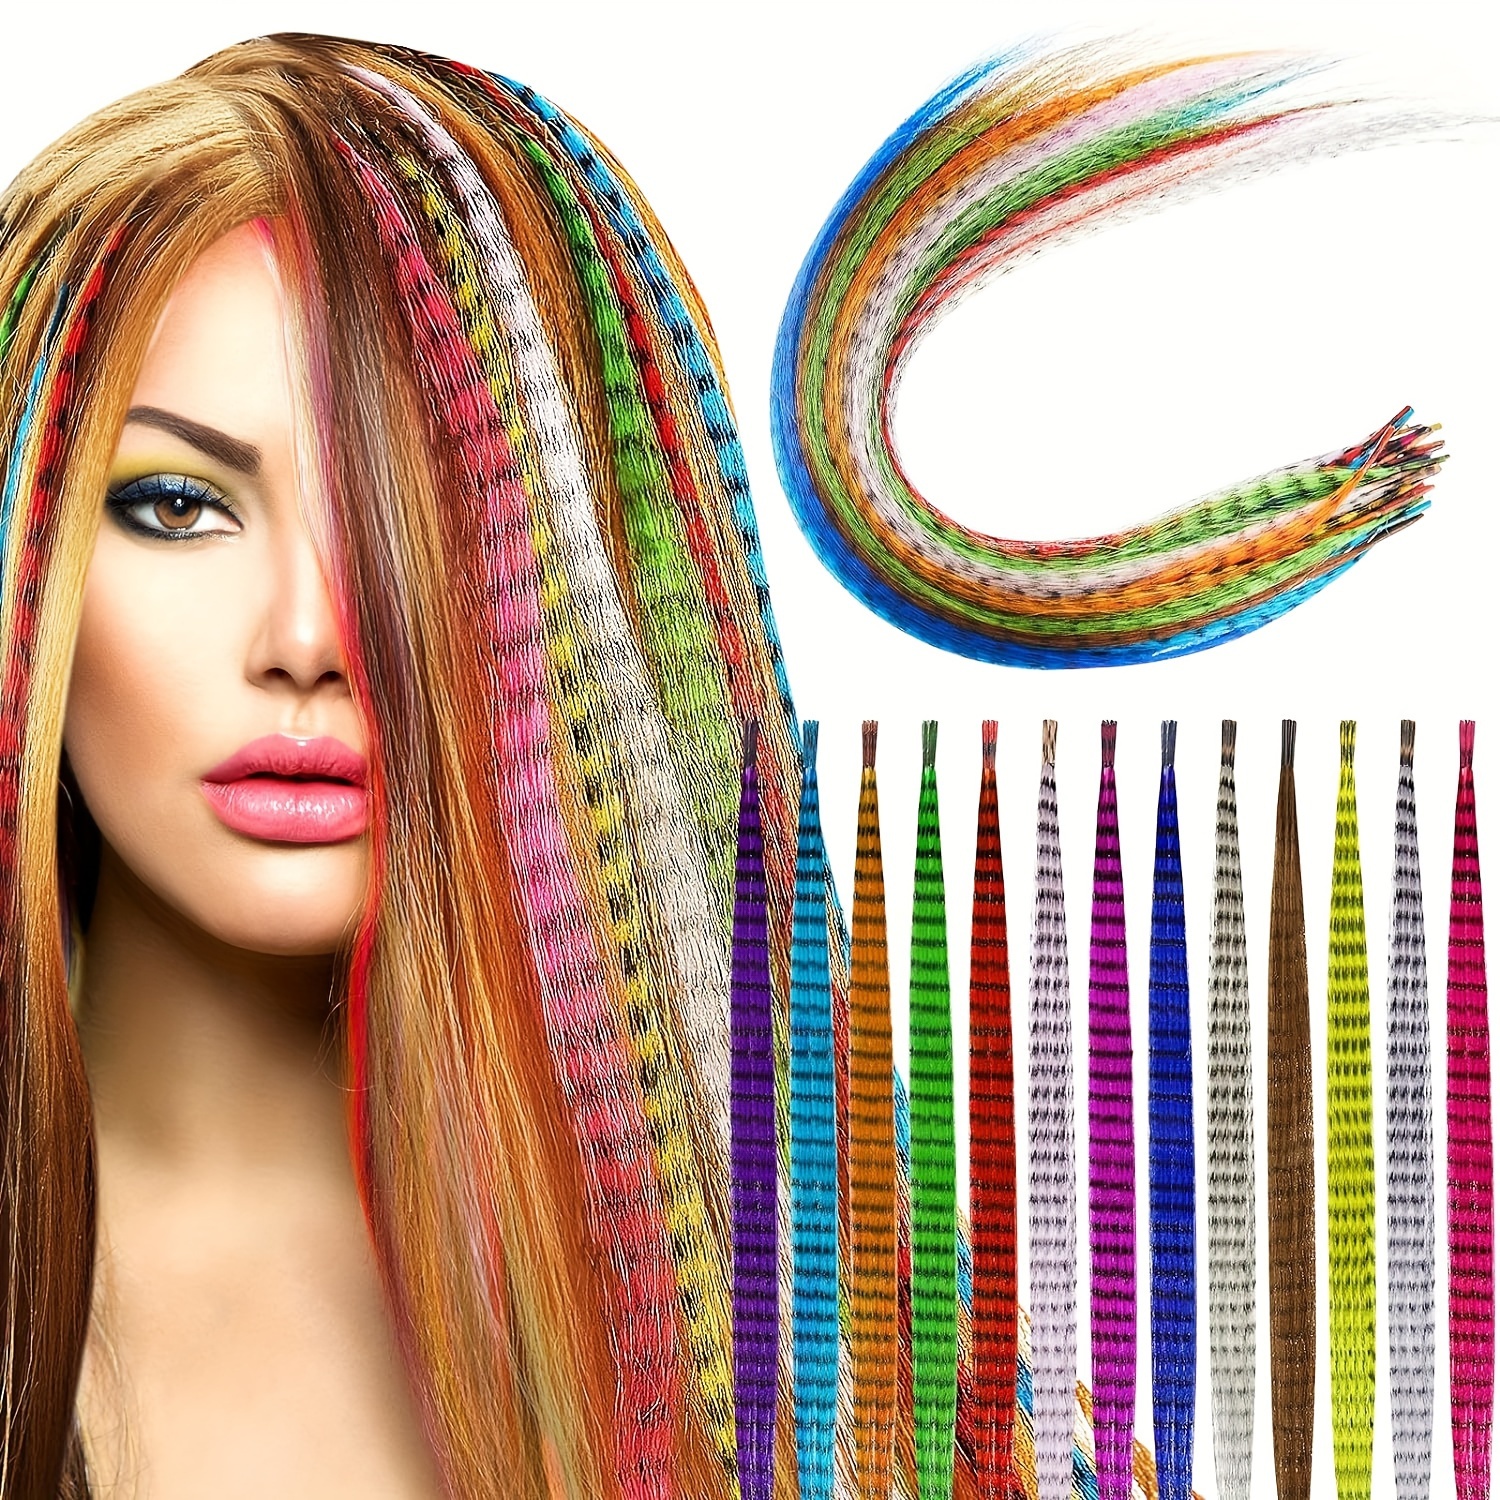 Colored Synthetic Feather Hair Extensions Kit (Not Real Feather) with 50  Pcs Silicon Micro Link Beads 1 Crochet Hook Tools Kit (16 Inch (Pack of  100)